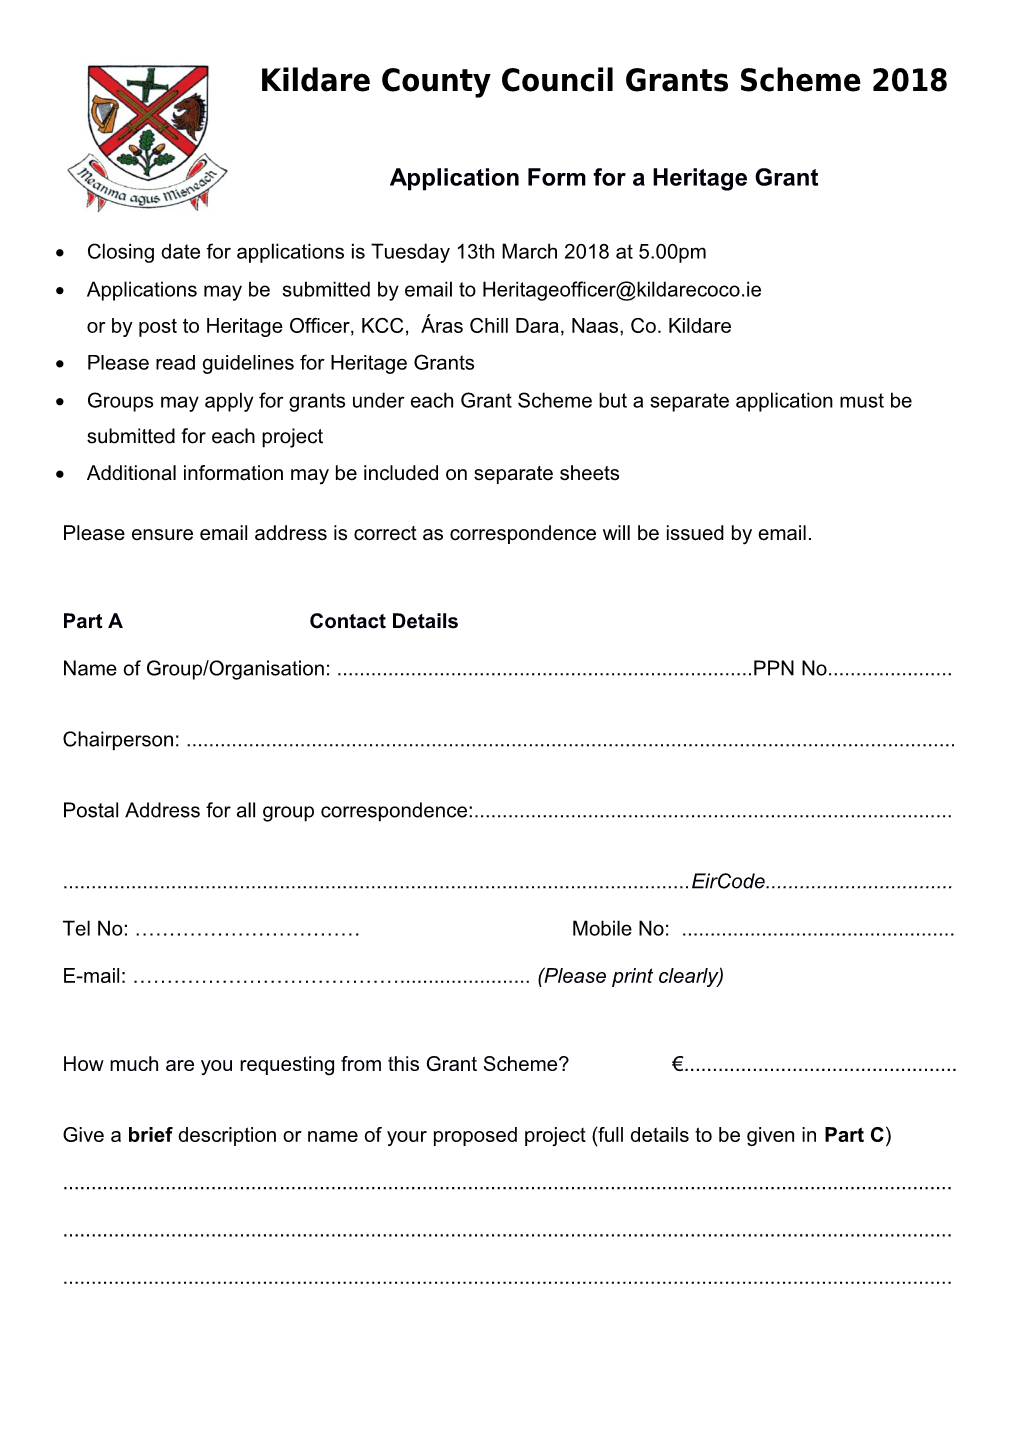 Application Form for a Heritage Grant